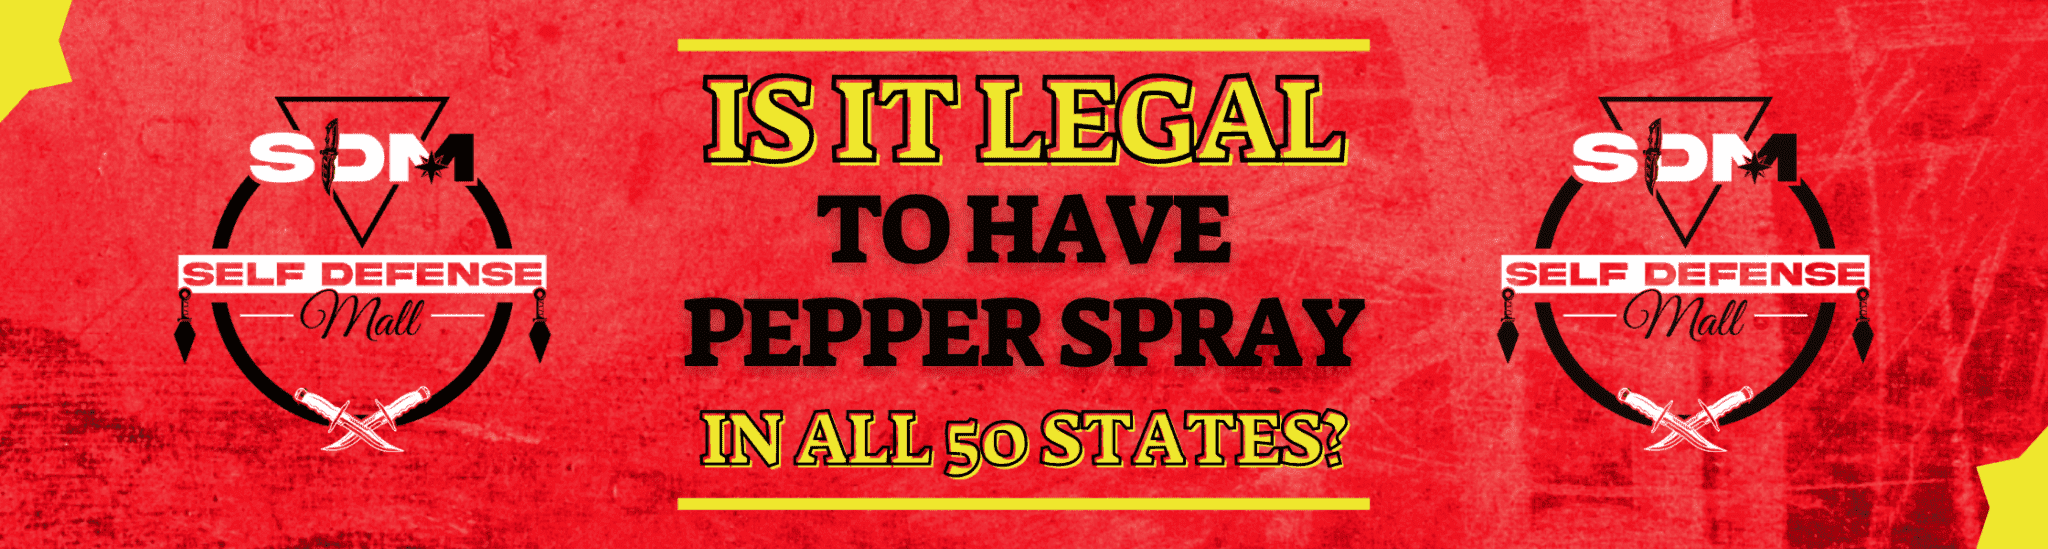 Is-it-legal-to-have-a-pepper-spray-in-all-50-states_-2048x549